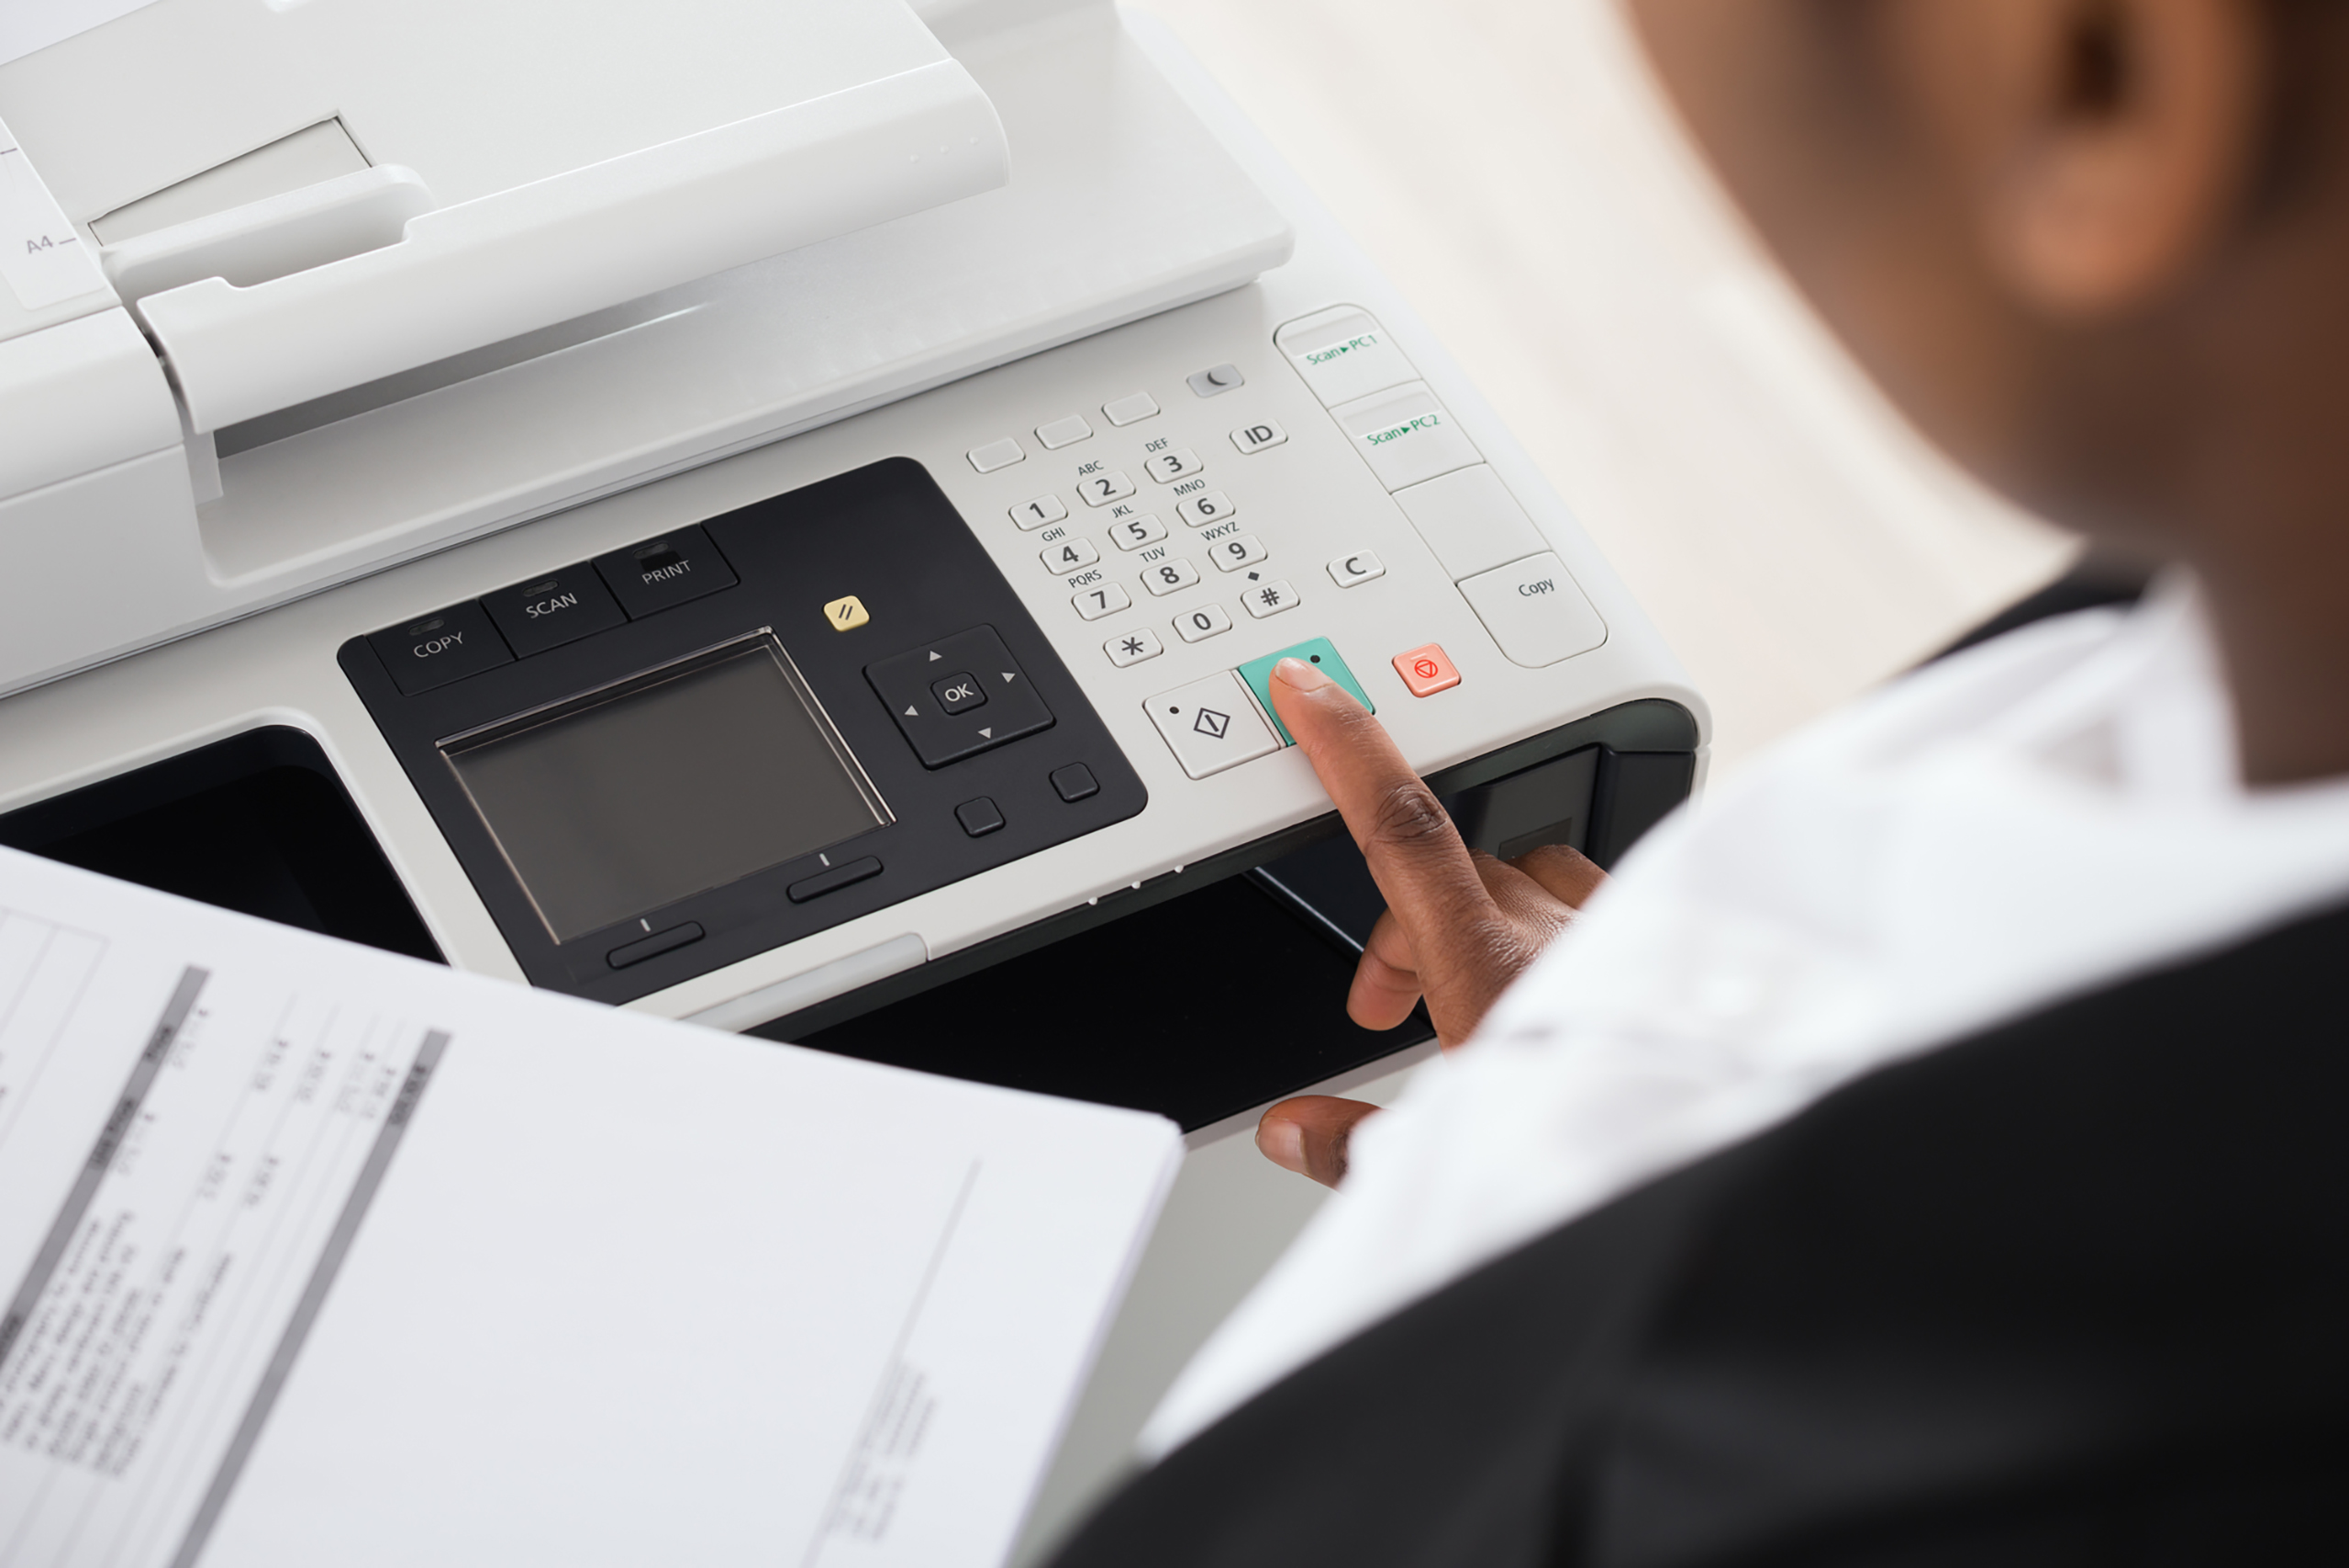 The End of Fax Britannica! Is a New Paperless Age Coming to Britain’s Public Sector?